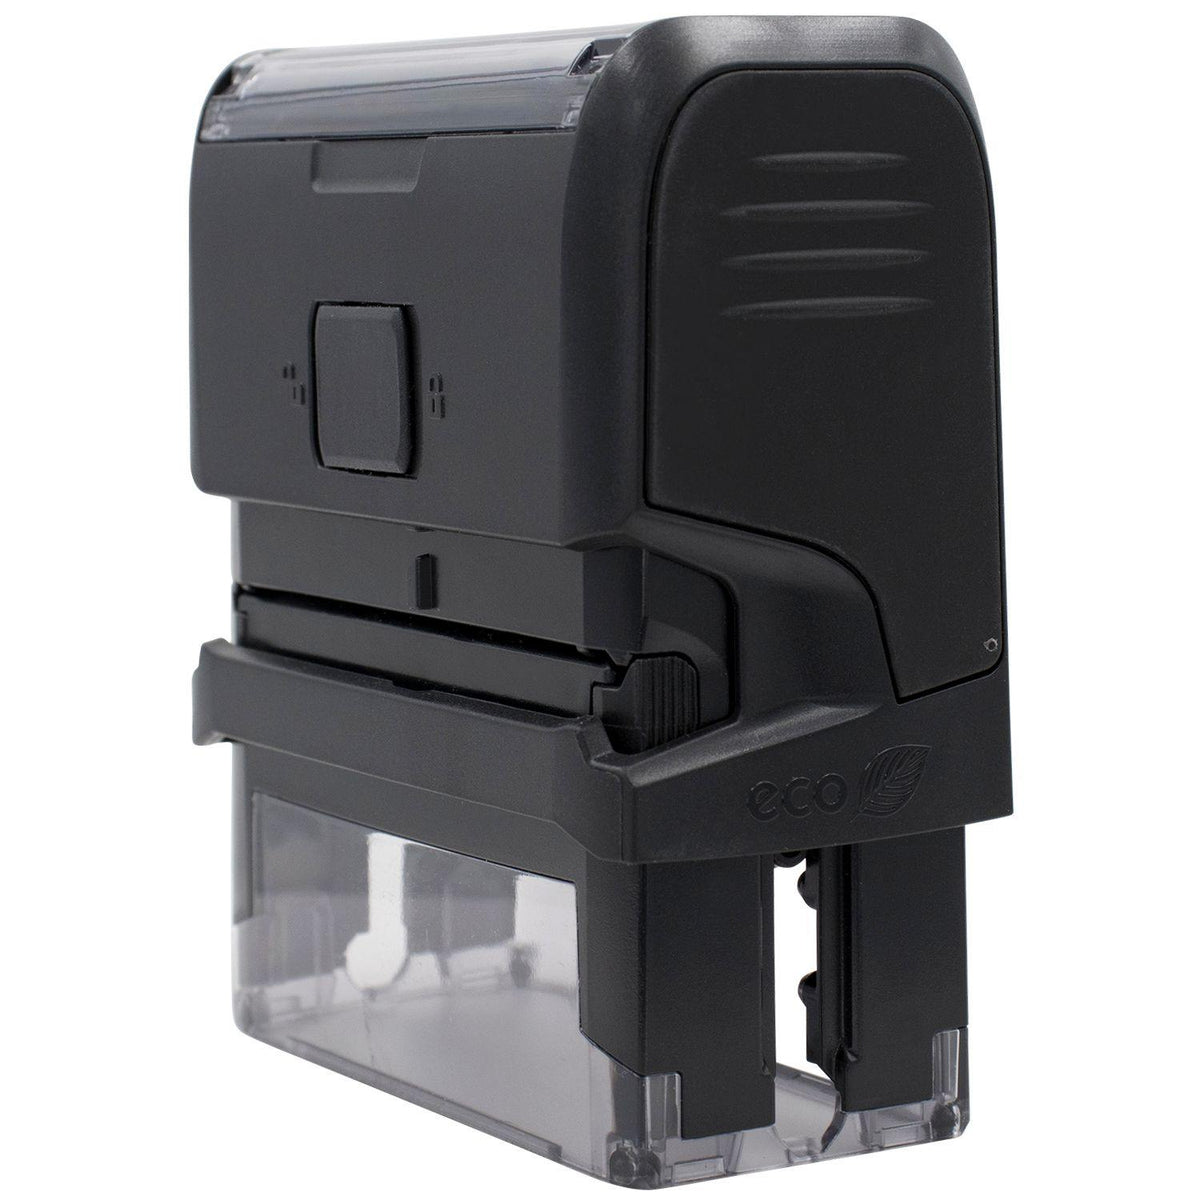 Side View of Large Self-Inking Bravo with Hands Stamp at an Angle